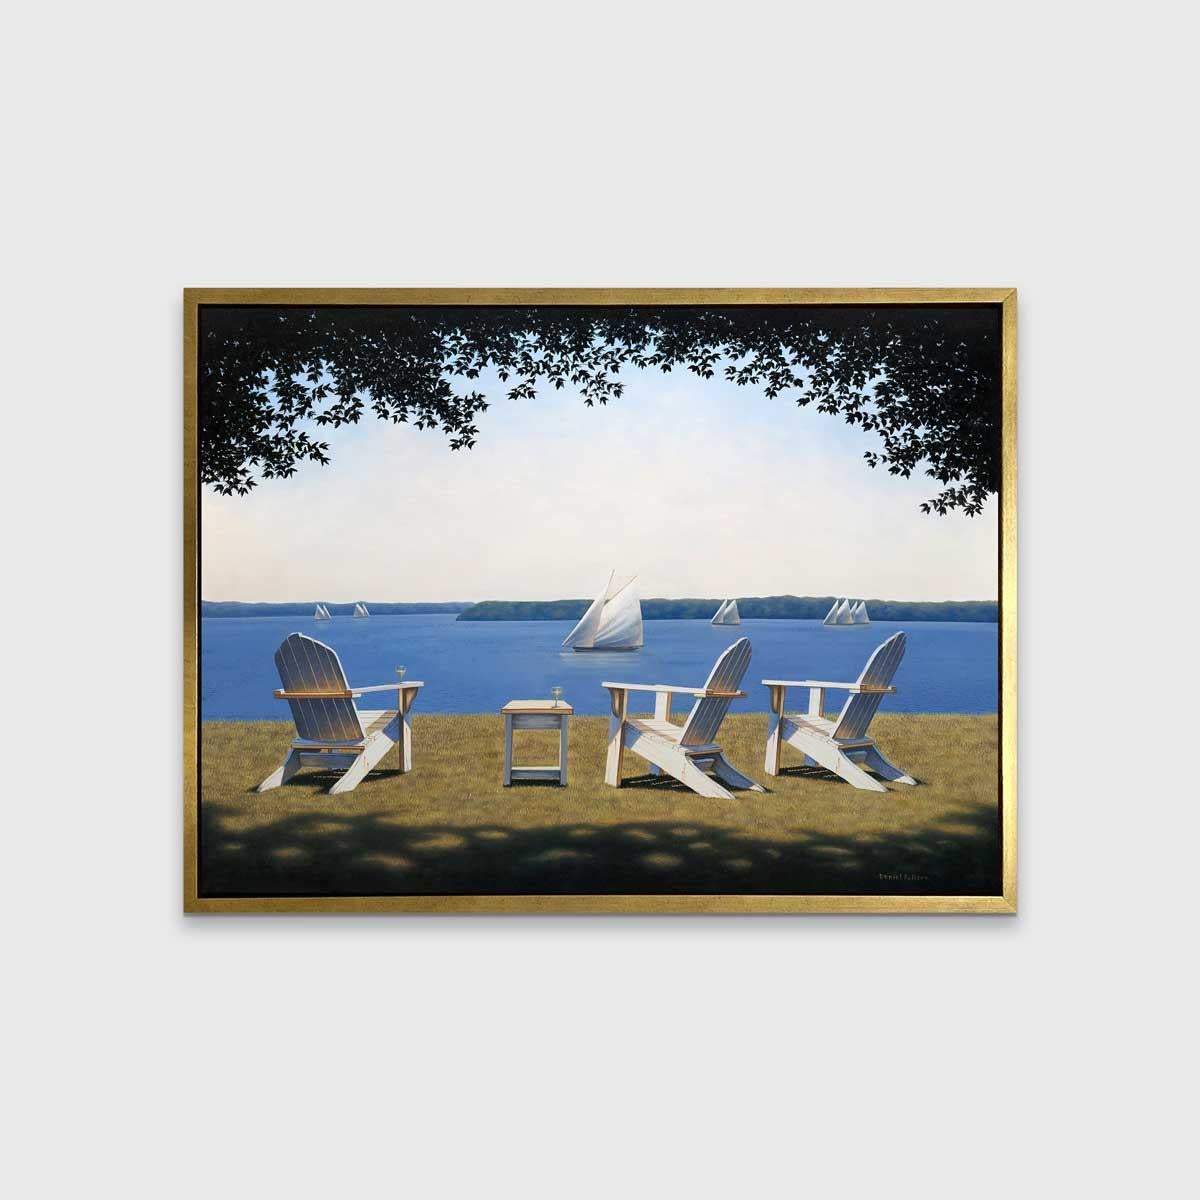 This traditional coastal Limited Edition print by Daniel Pollera pictures three white Adirondack chairs, positioned in the grass overlooking a body of water. Several sailboats can be seen close up and further out along the horizon line. A pale blue